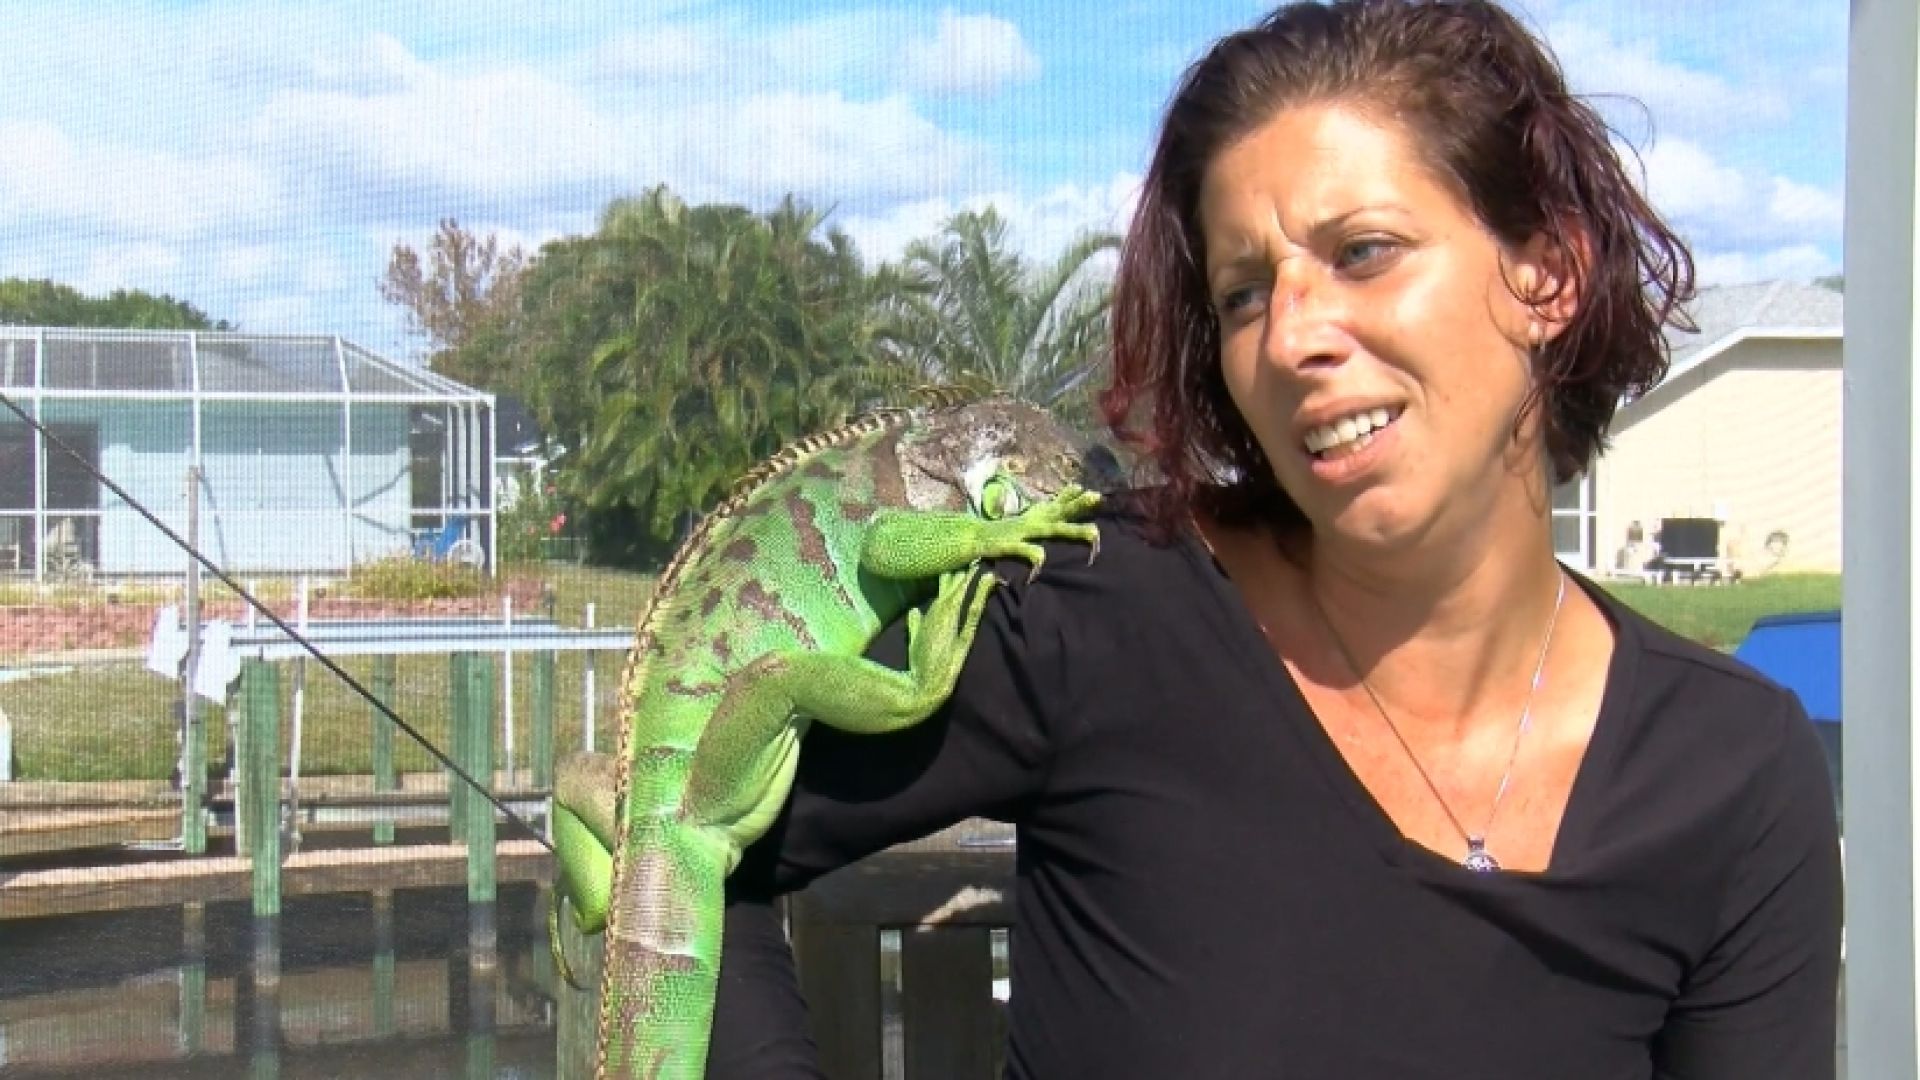 “A Florida woman's pet iguana goes from sleeping in her shirt to re...